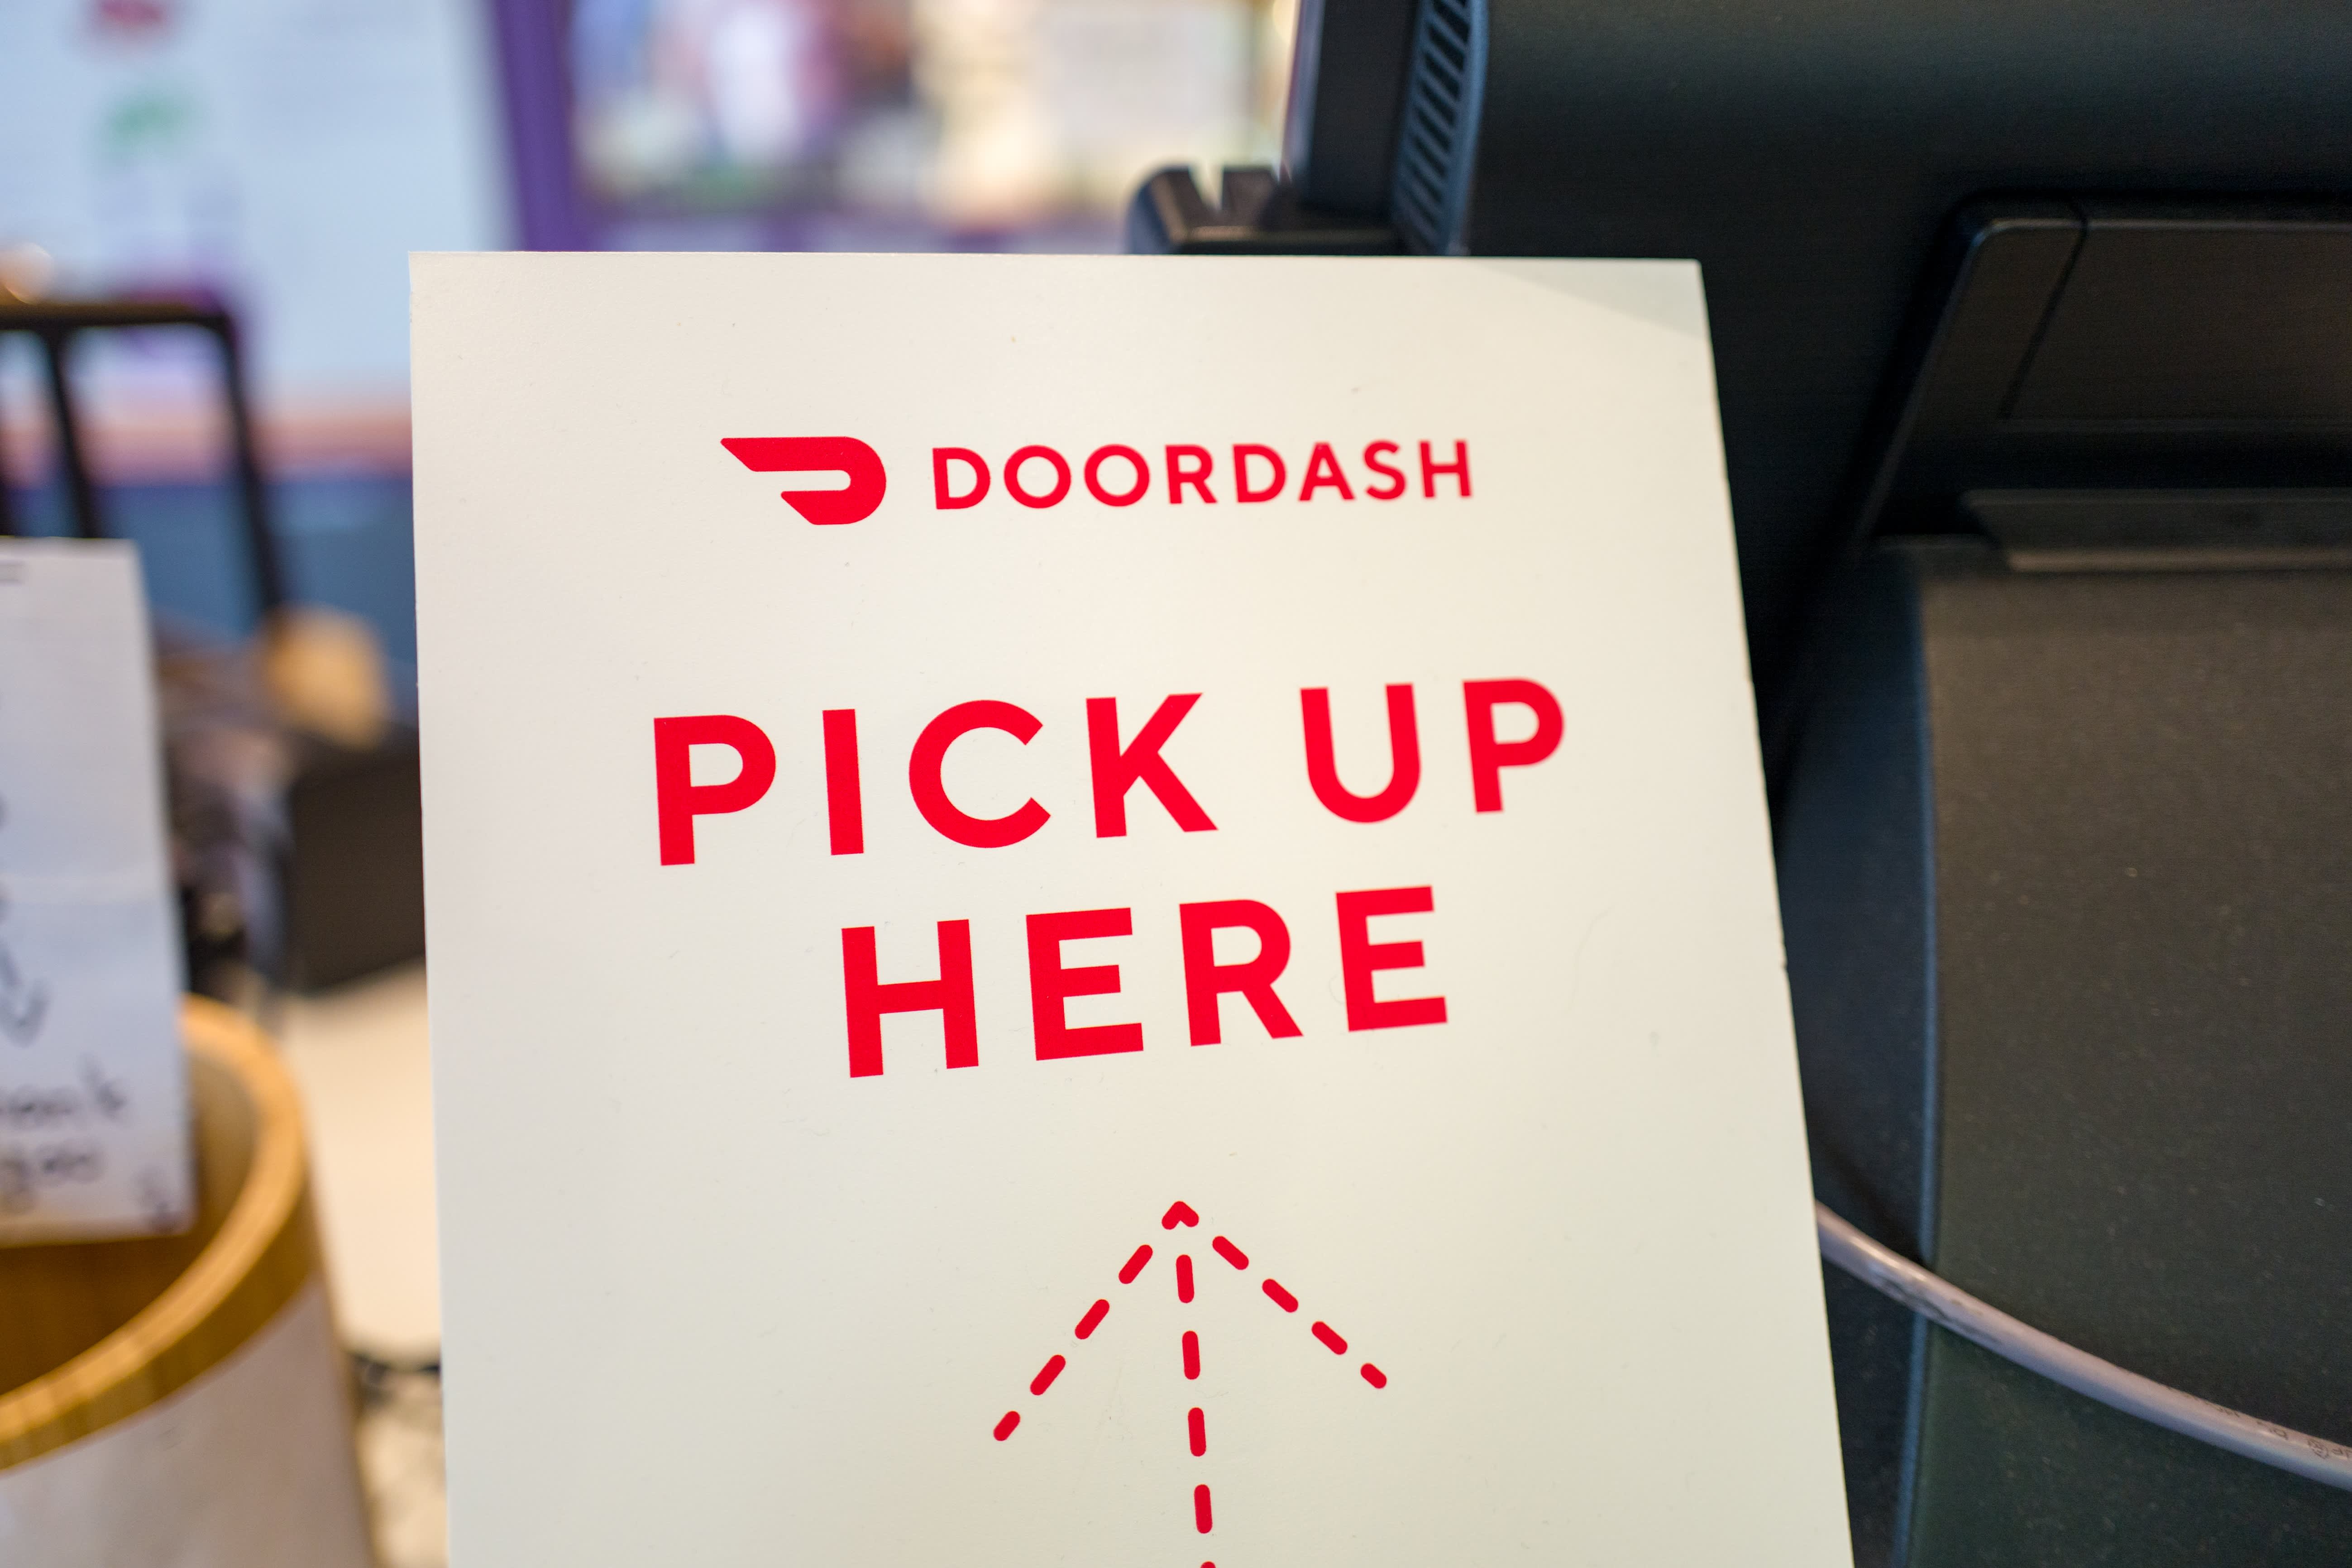 Cramer sees 'rabid money' for tech IPOs, but warns investors not to chase DoorDash debut blindly